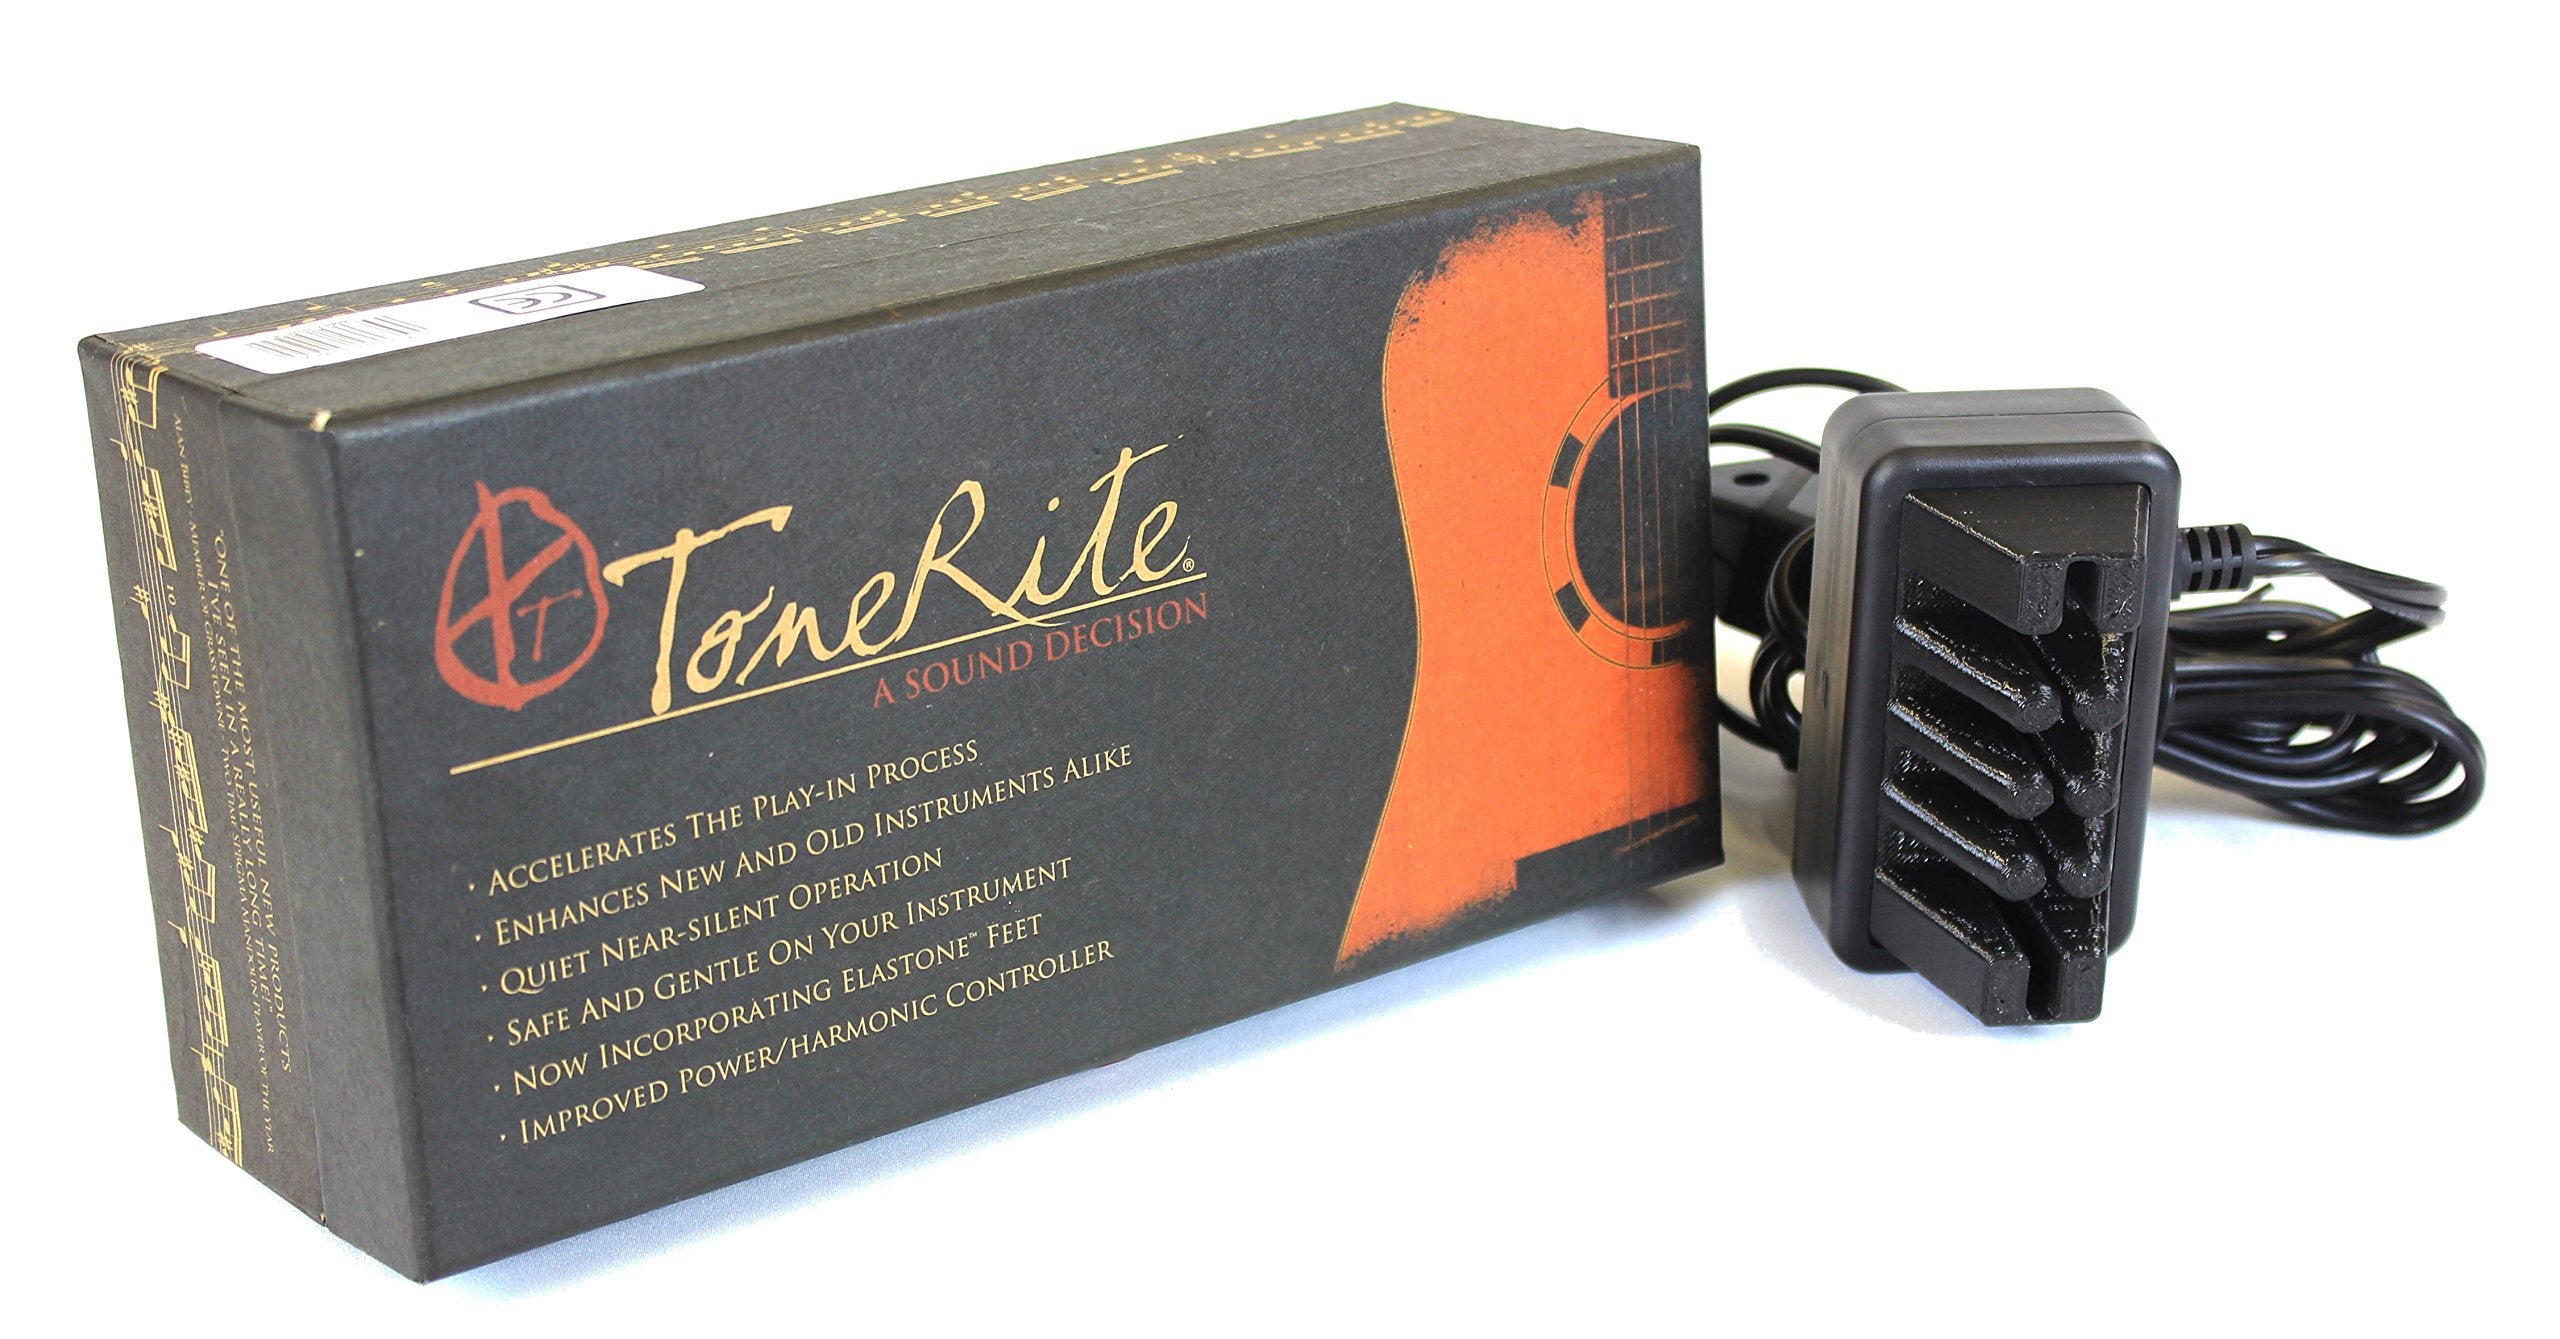 New ToneRite 3G for Cello (220 Volt) - Break In Your Instrument's Tone Automatically - Without Playing for Hours!